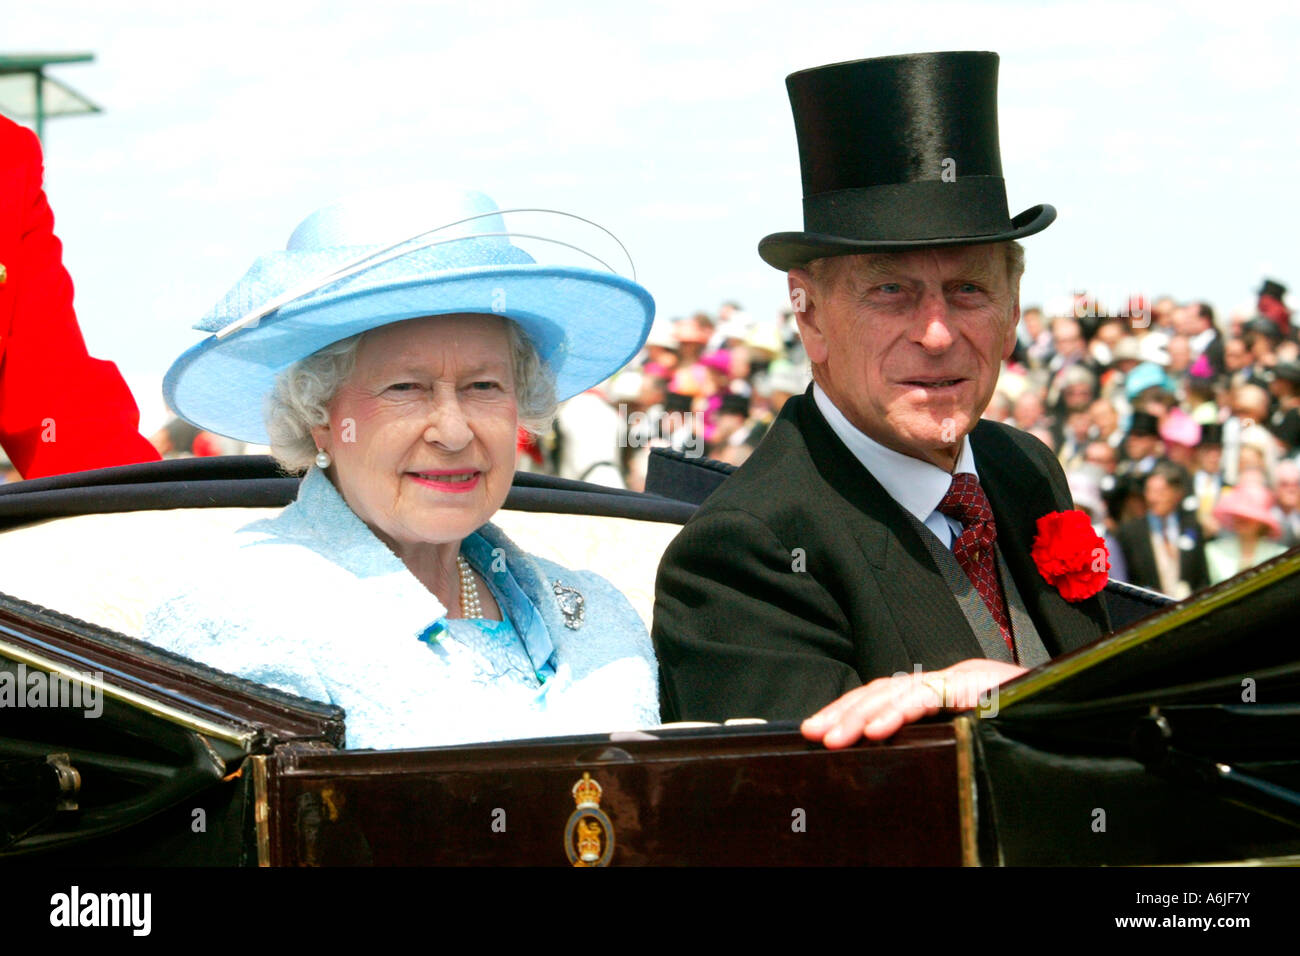 Her Majesty The Queen Elisabeth Ii And Her Husband His Royal Highness